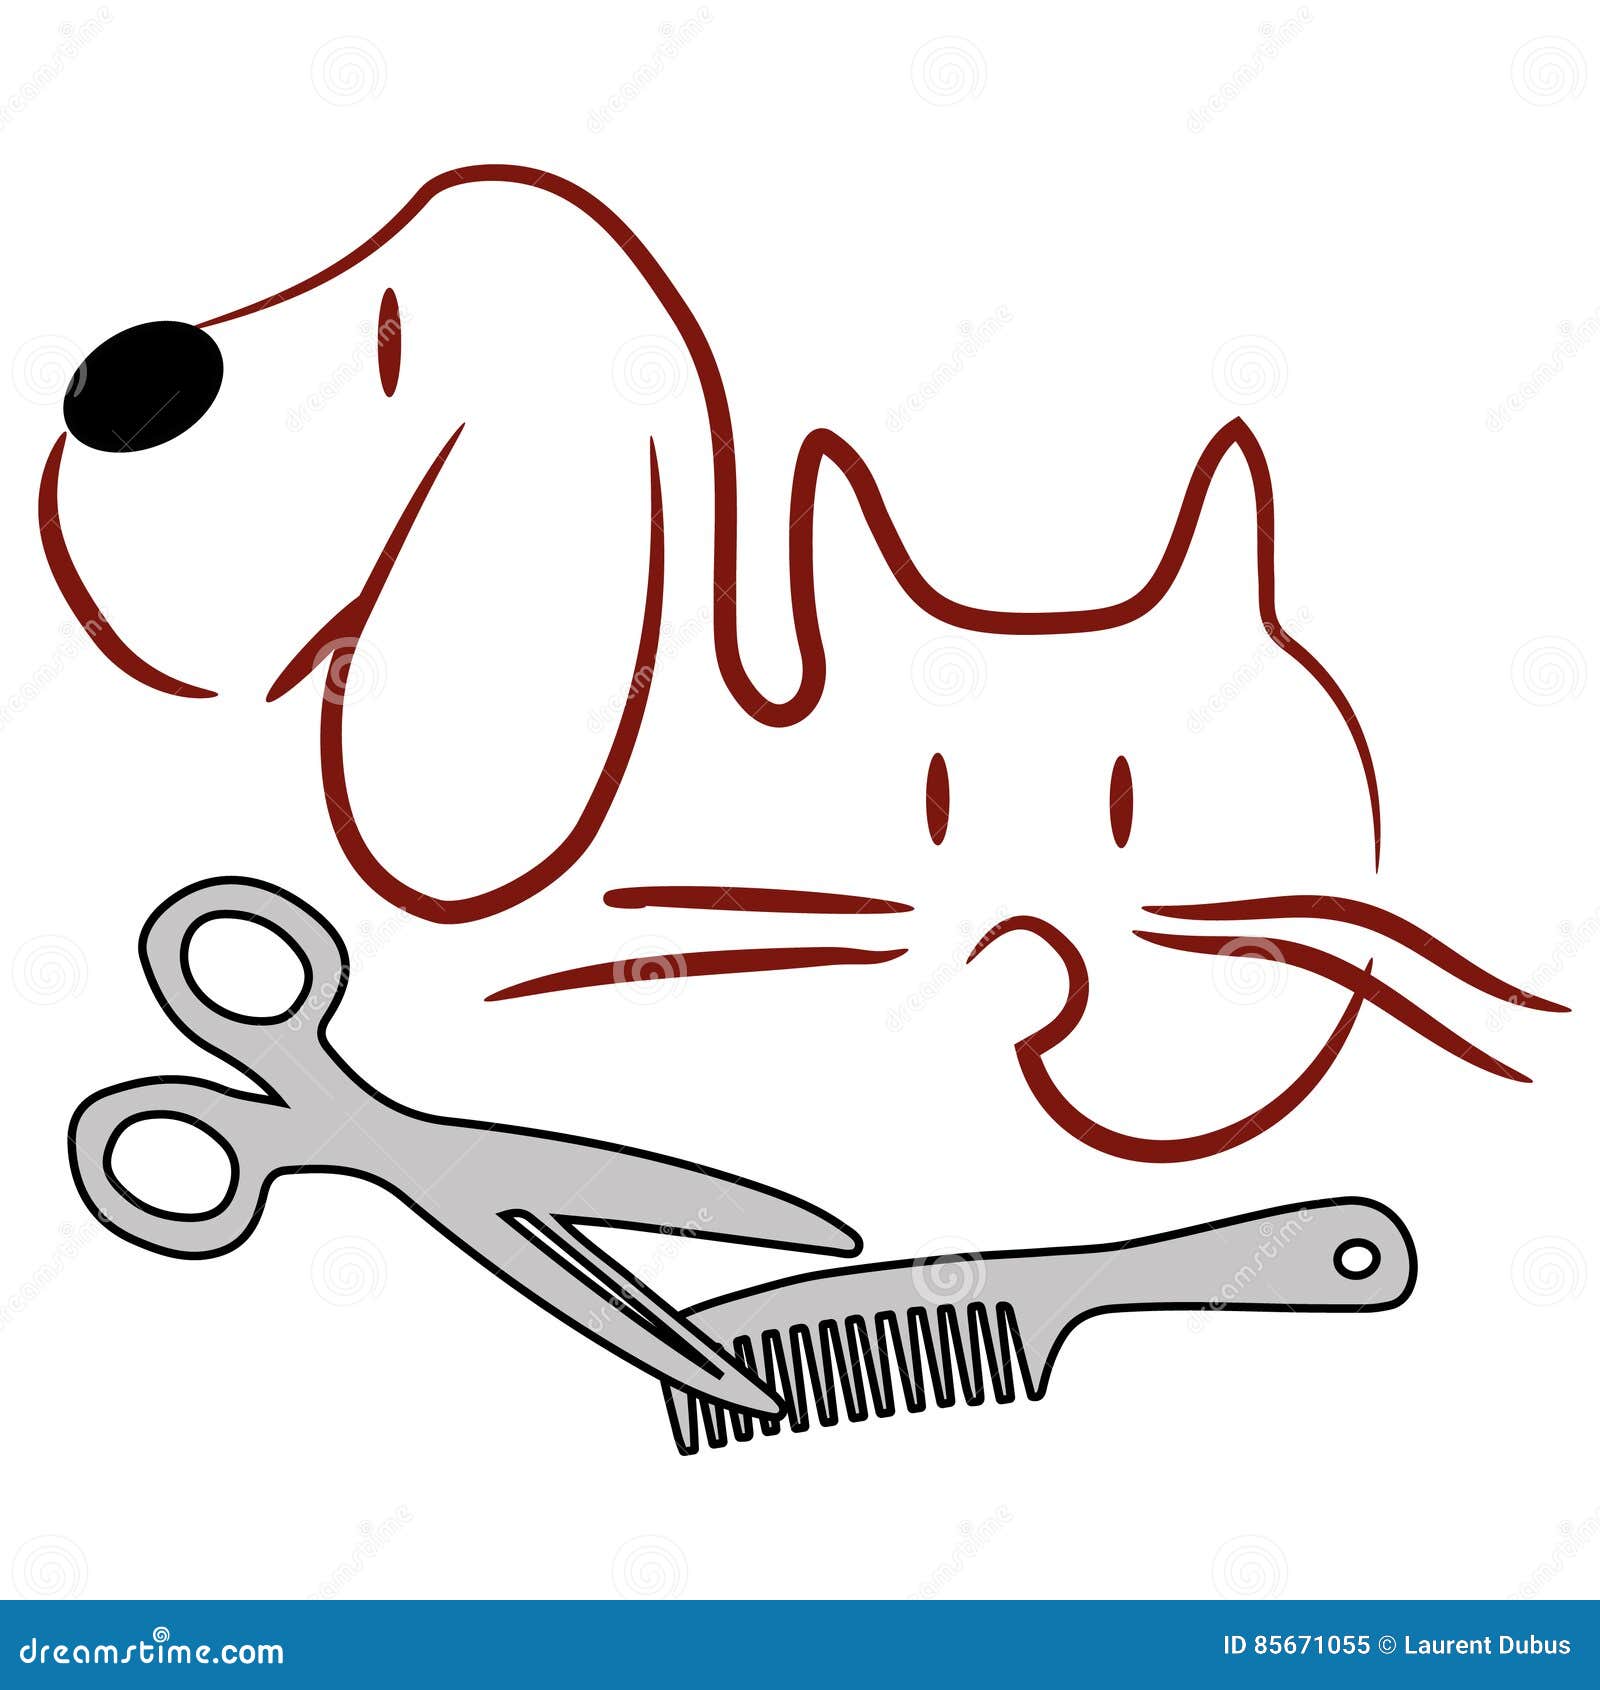 Cat And Dog Grooming Logo Stock Vector Illustration Of Emergency